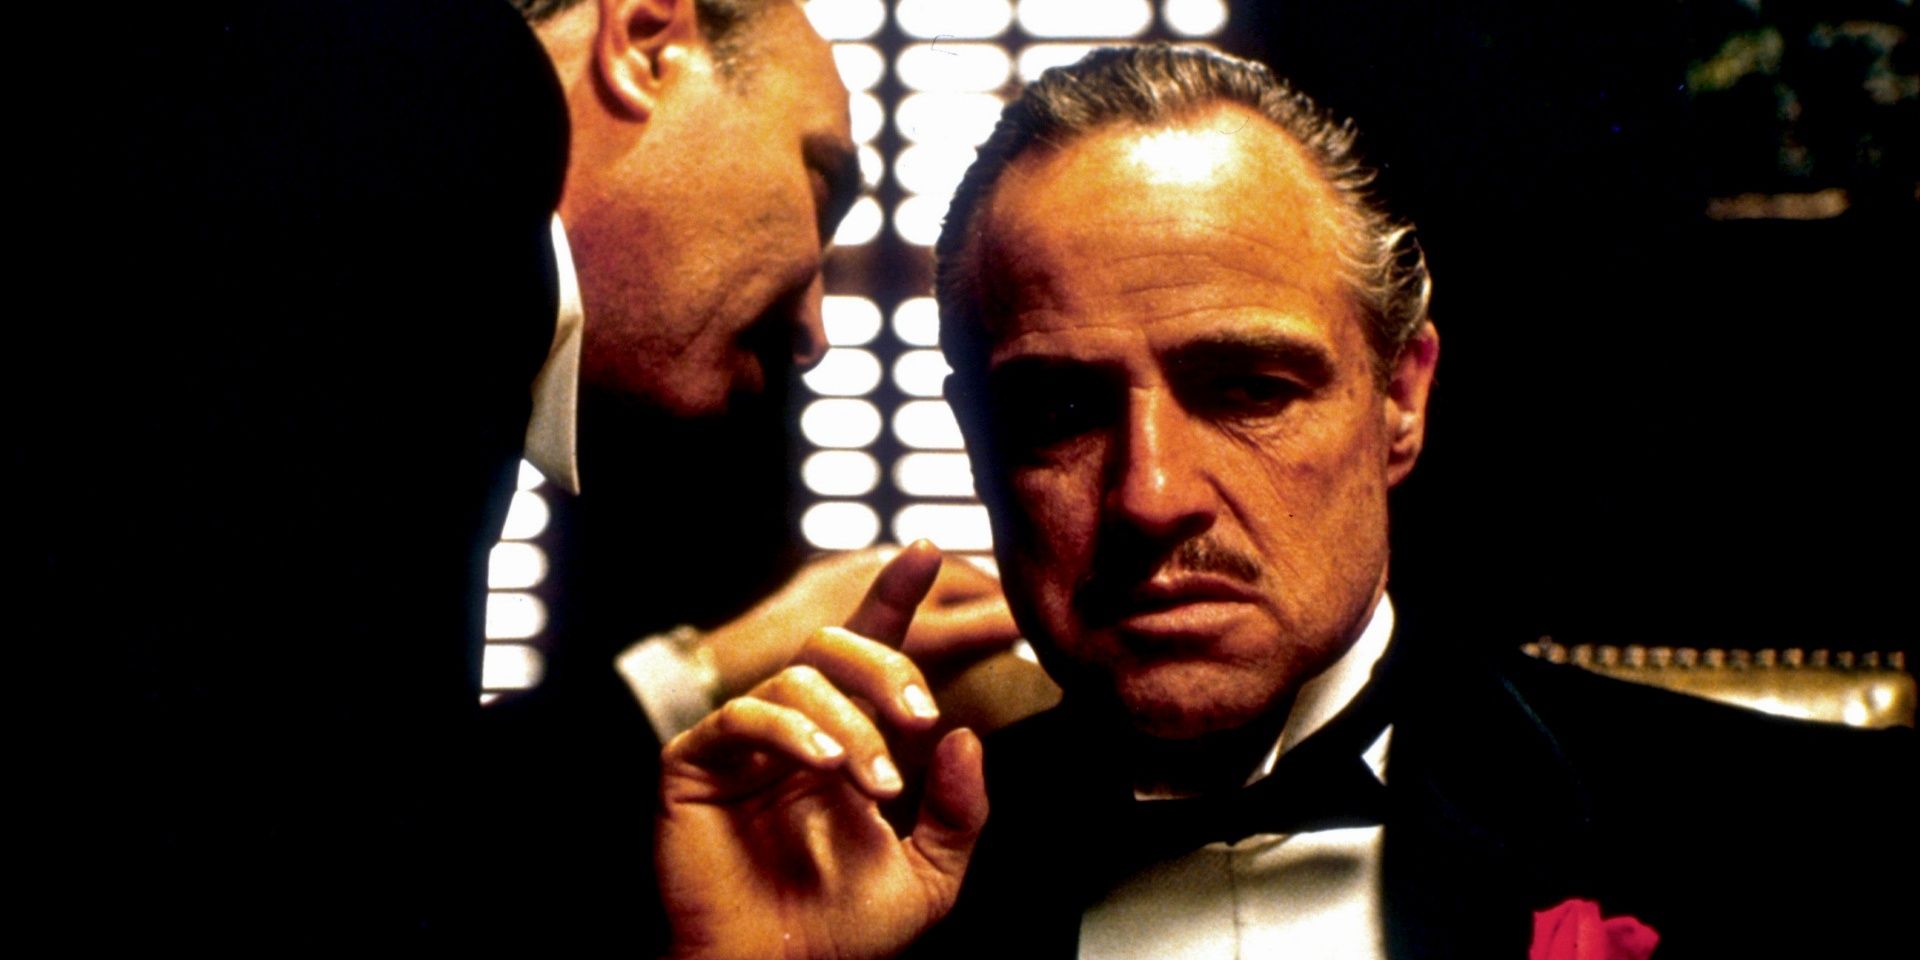 iconic scene from The Godfather depicting Bonasera whispering into the ears of Vito Corleone